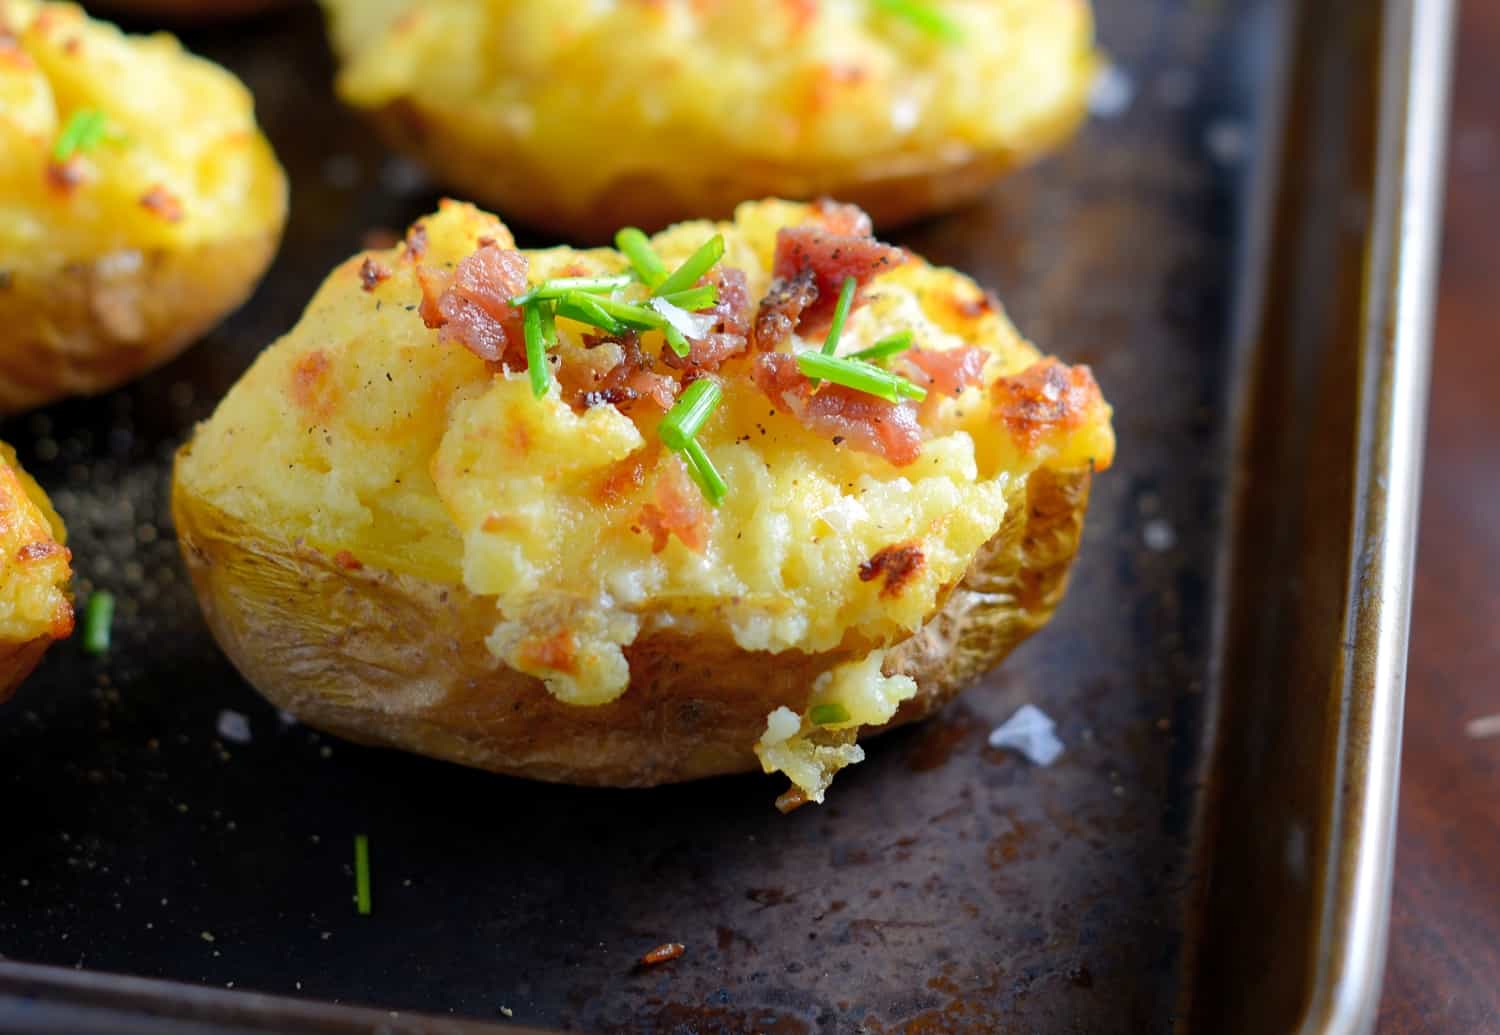 These cheesy twice baked potatoes are the BEST! My whole family gobbles them up, so I make double. The secret ingredient really makes these POP and stand out from the rest.